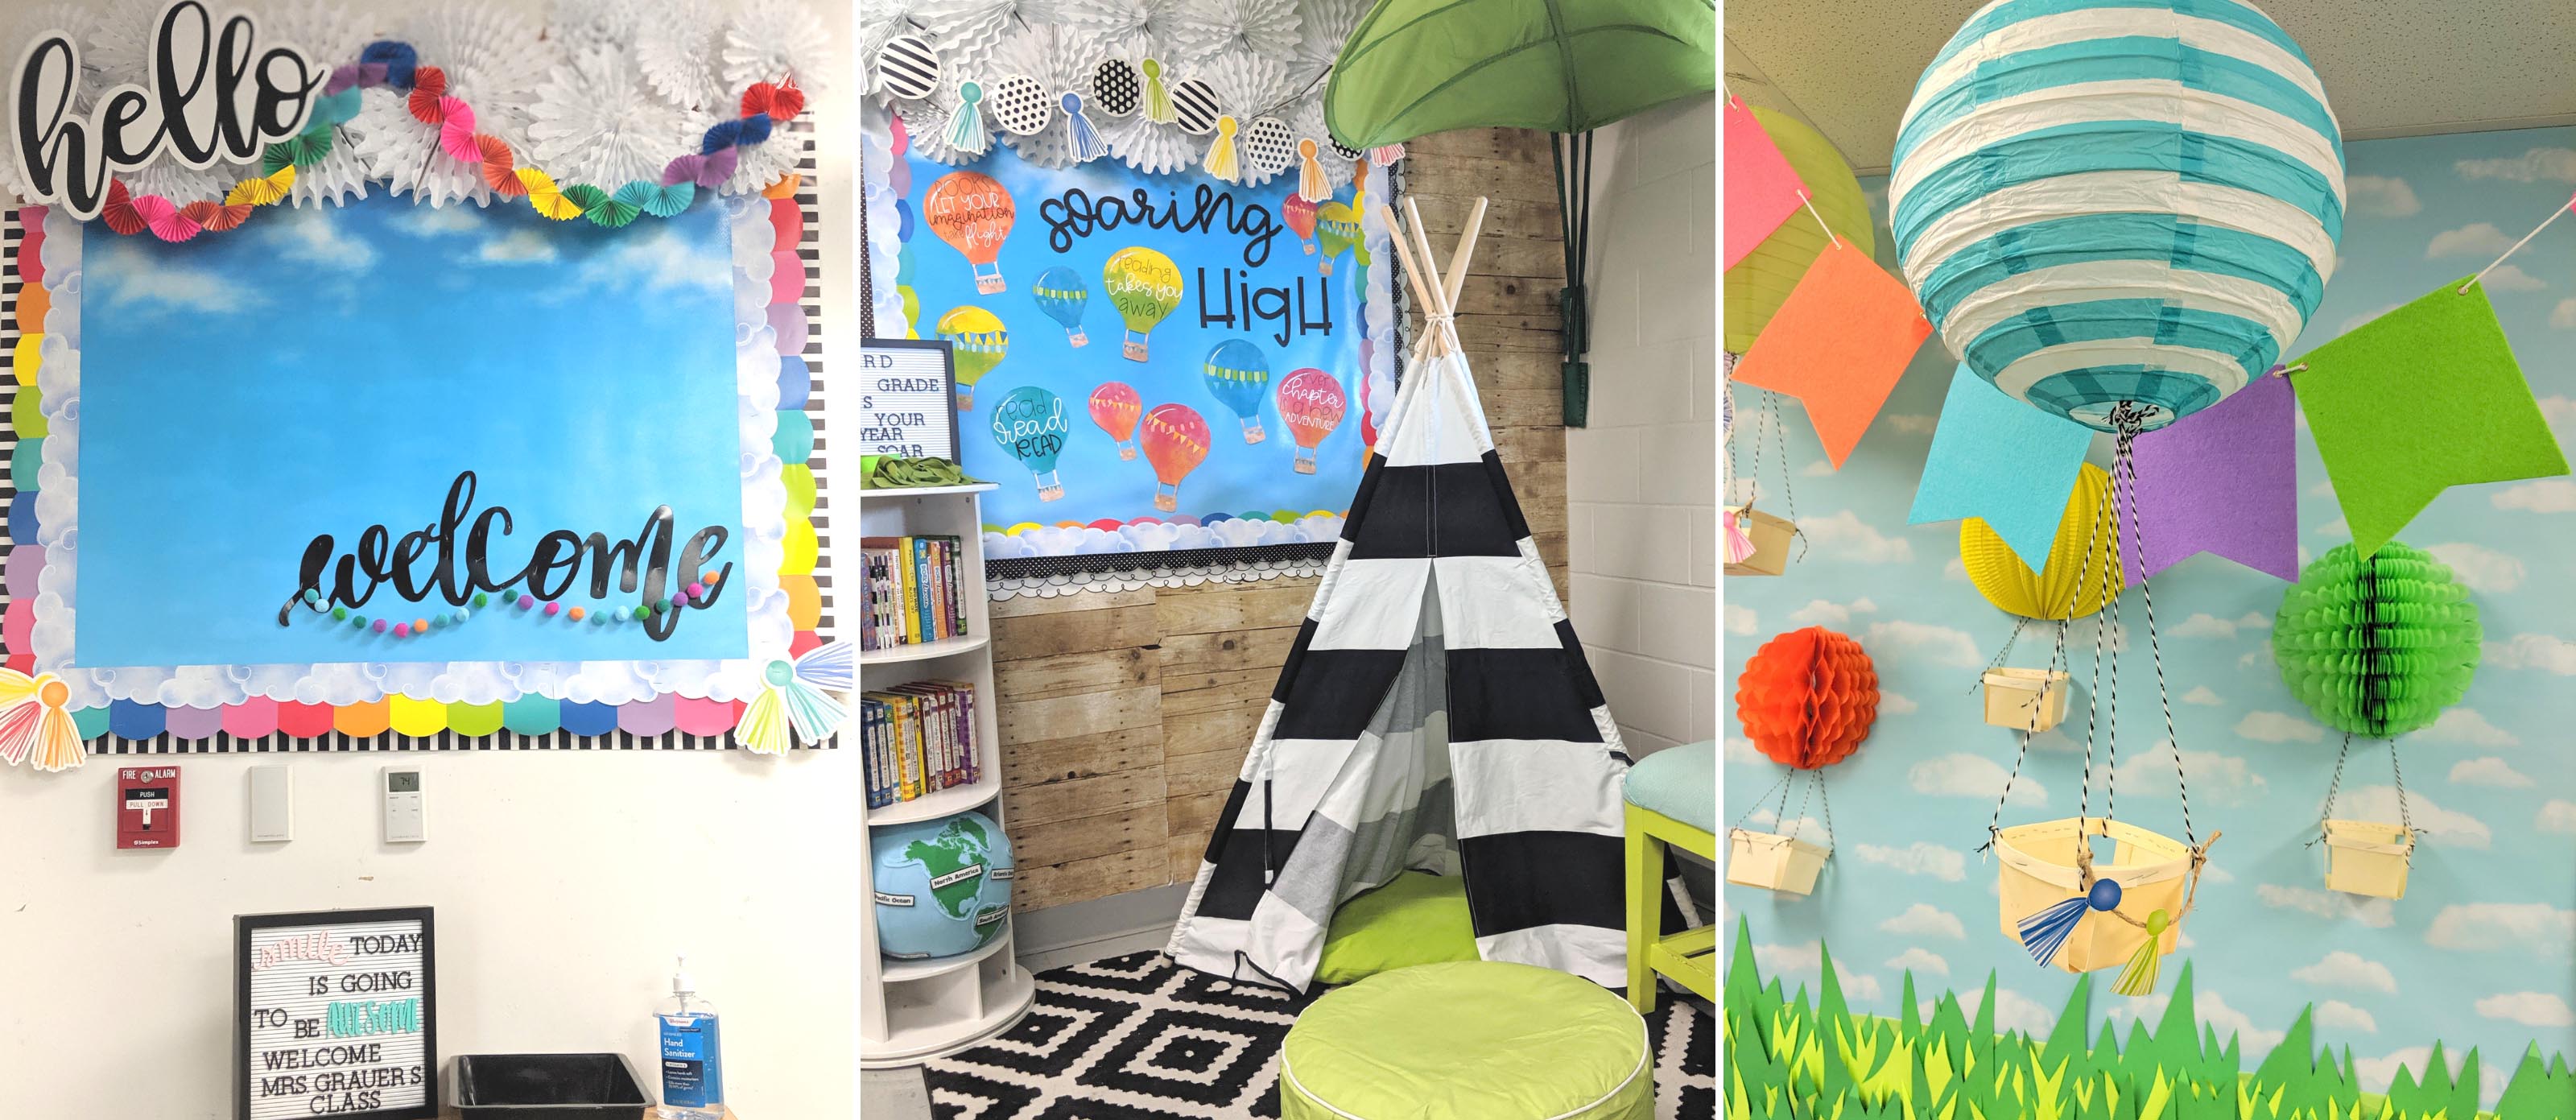 Brighten Your Board with Paper Fan Garlands, Colorize Your Classroom